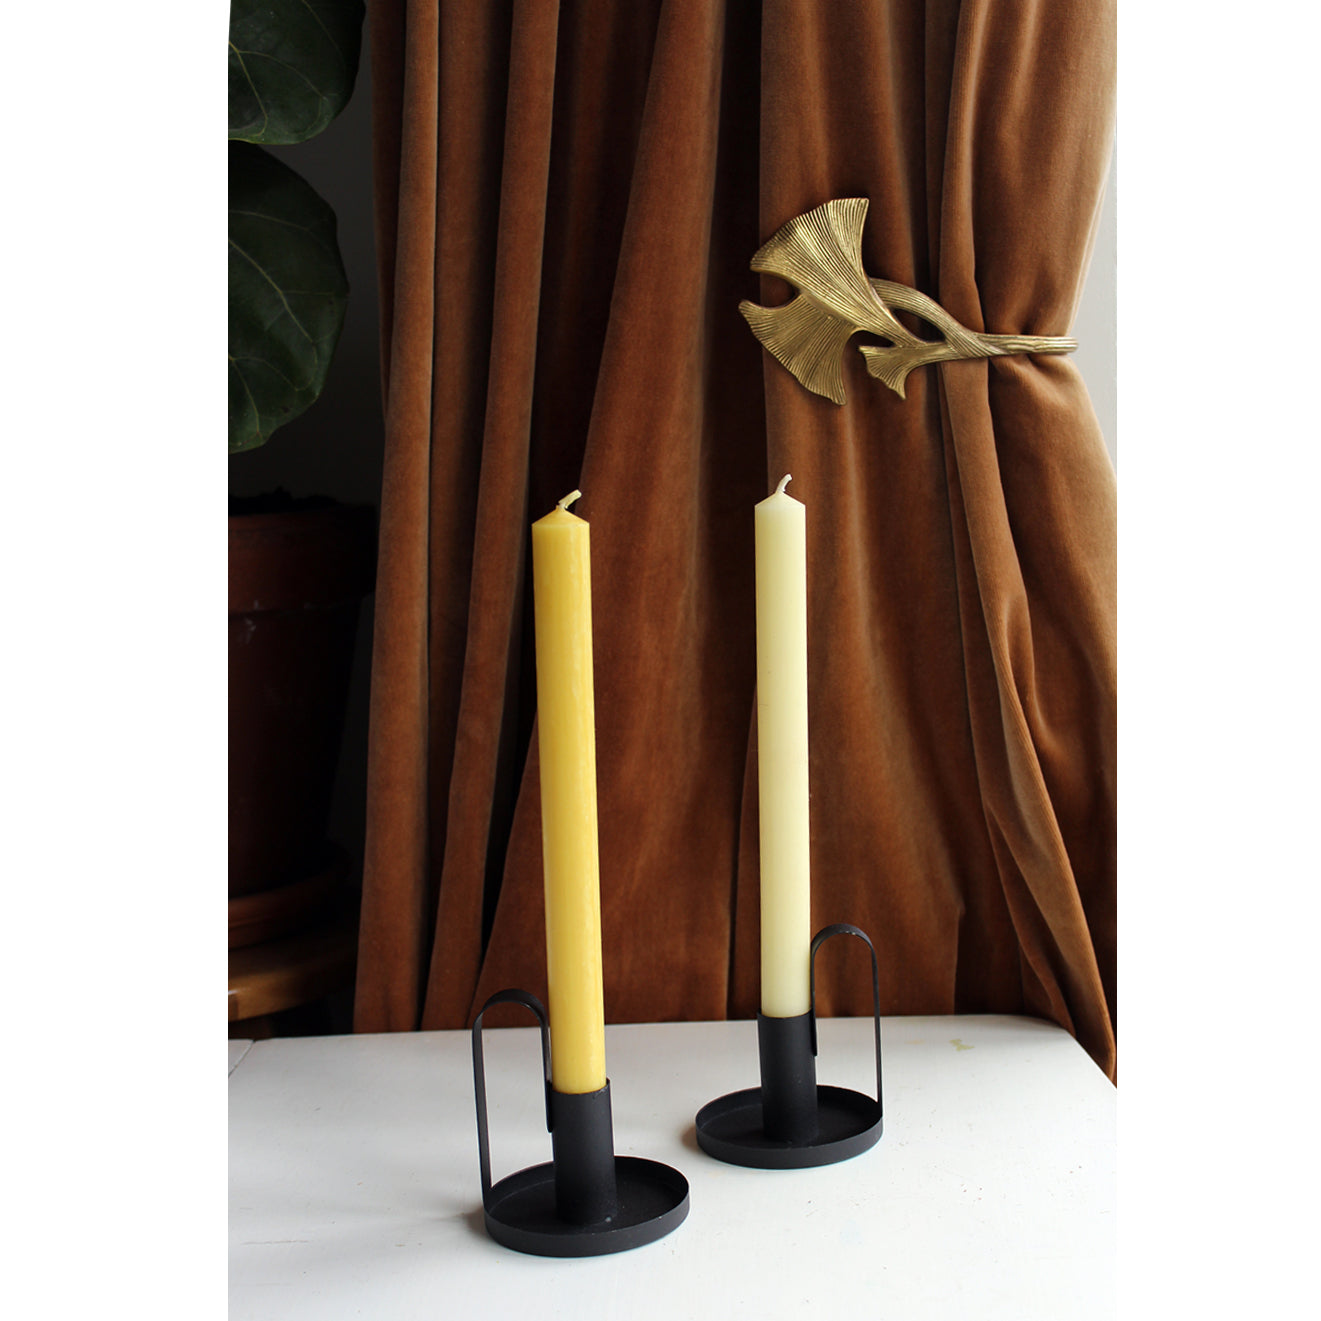 Black Iron Tall Candle Holder